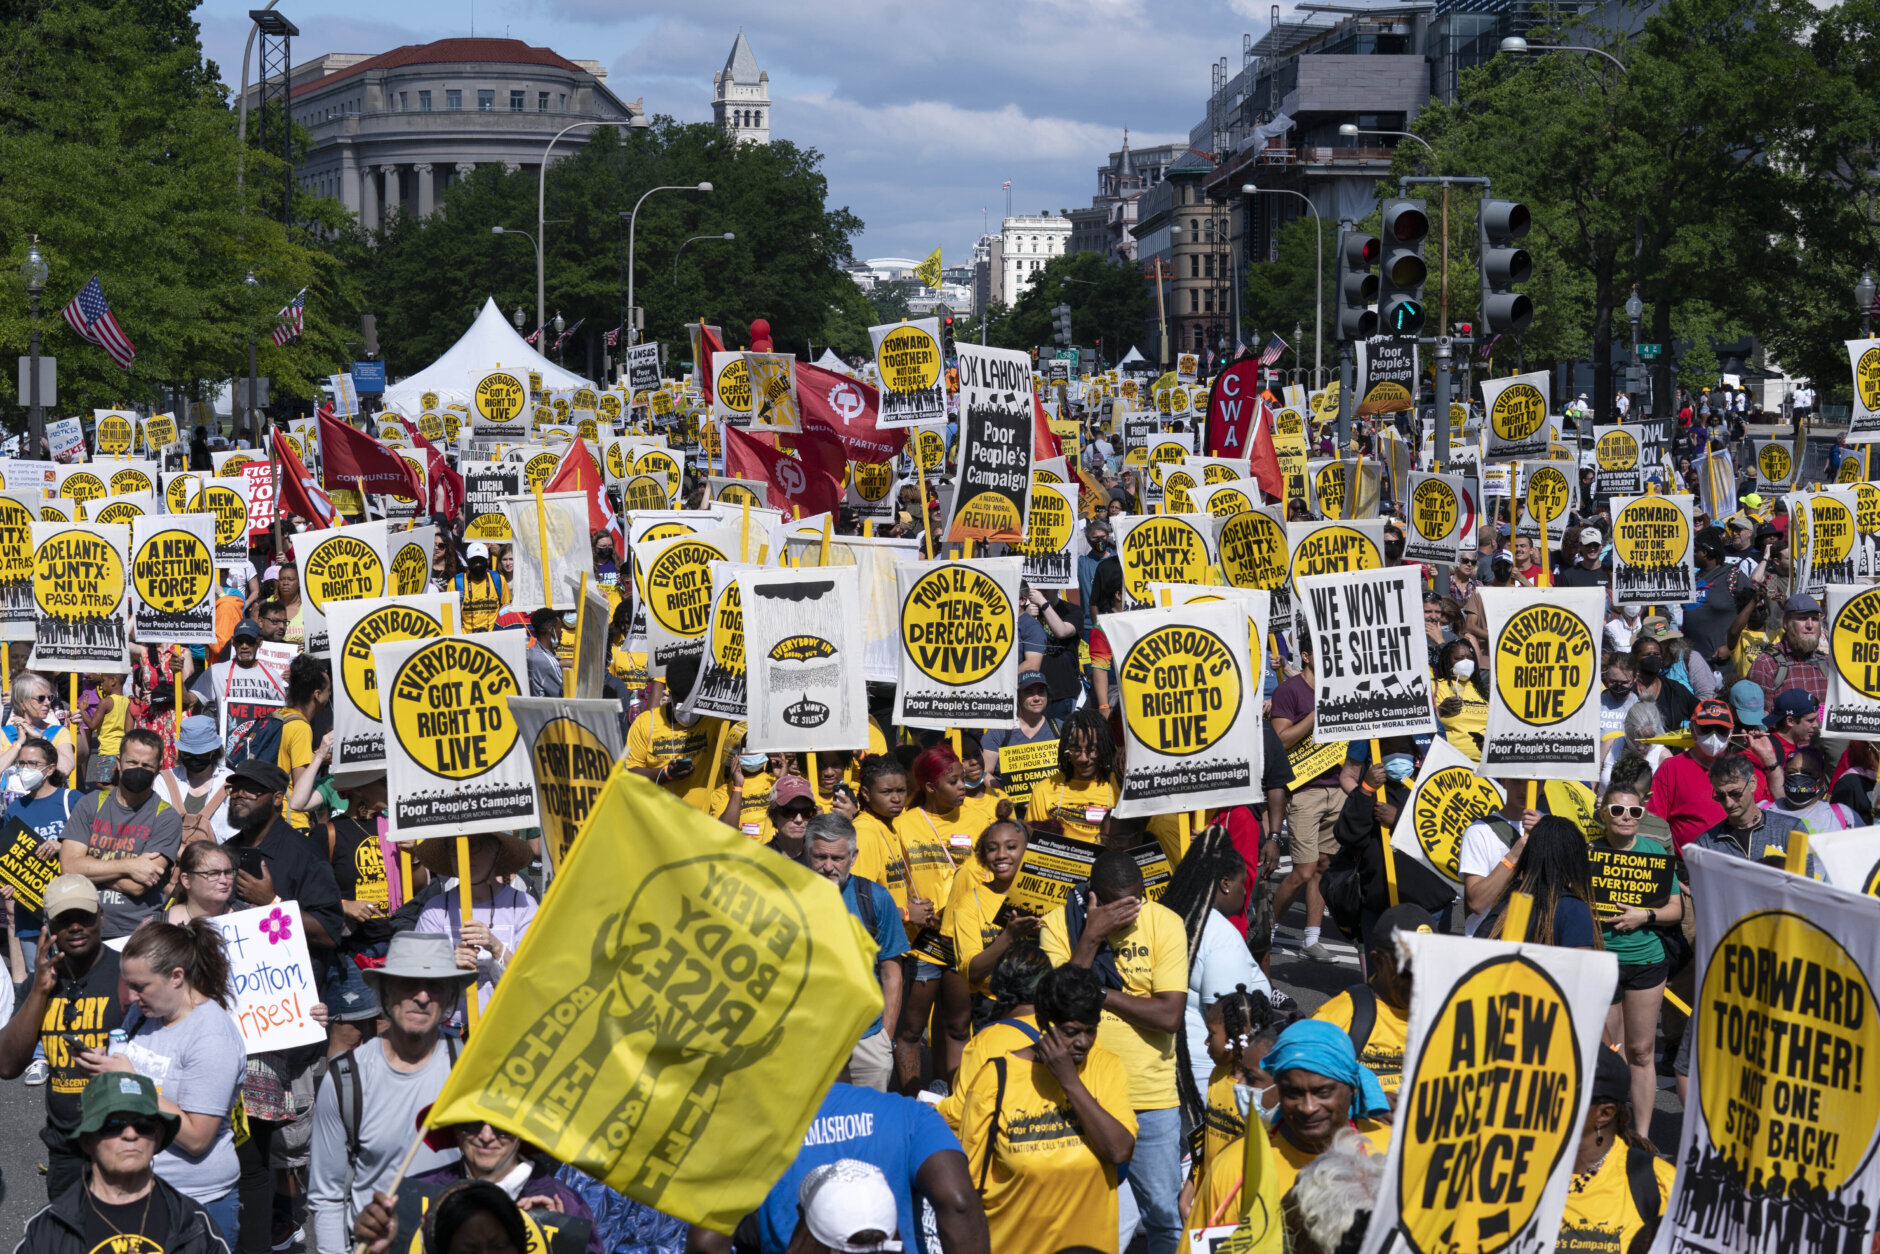 Demonstrators rally during the Poor People's Campaign, "Moral March" on Pennsylvania Avenue in Washington, Saturday, June 18, 2022. (AP Photo/Jose Luis Magana)